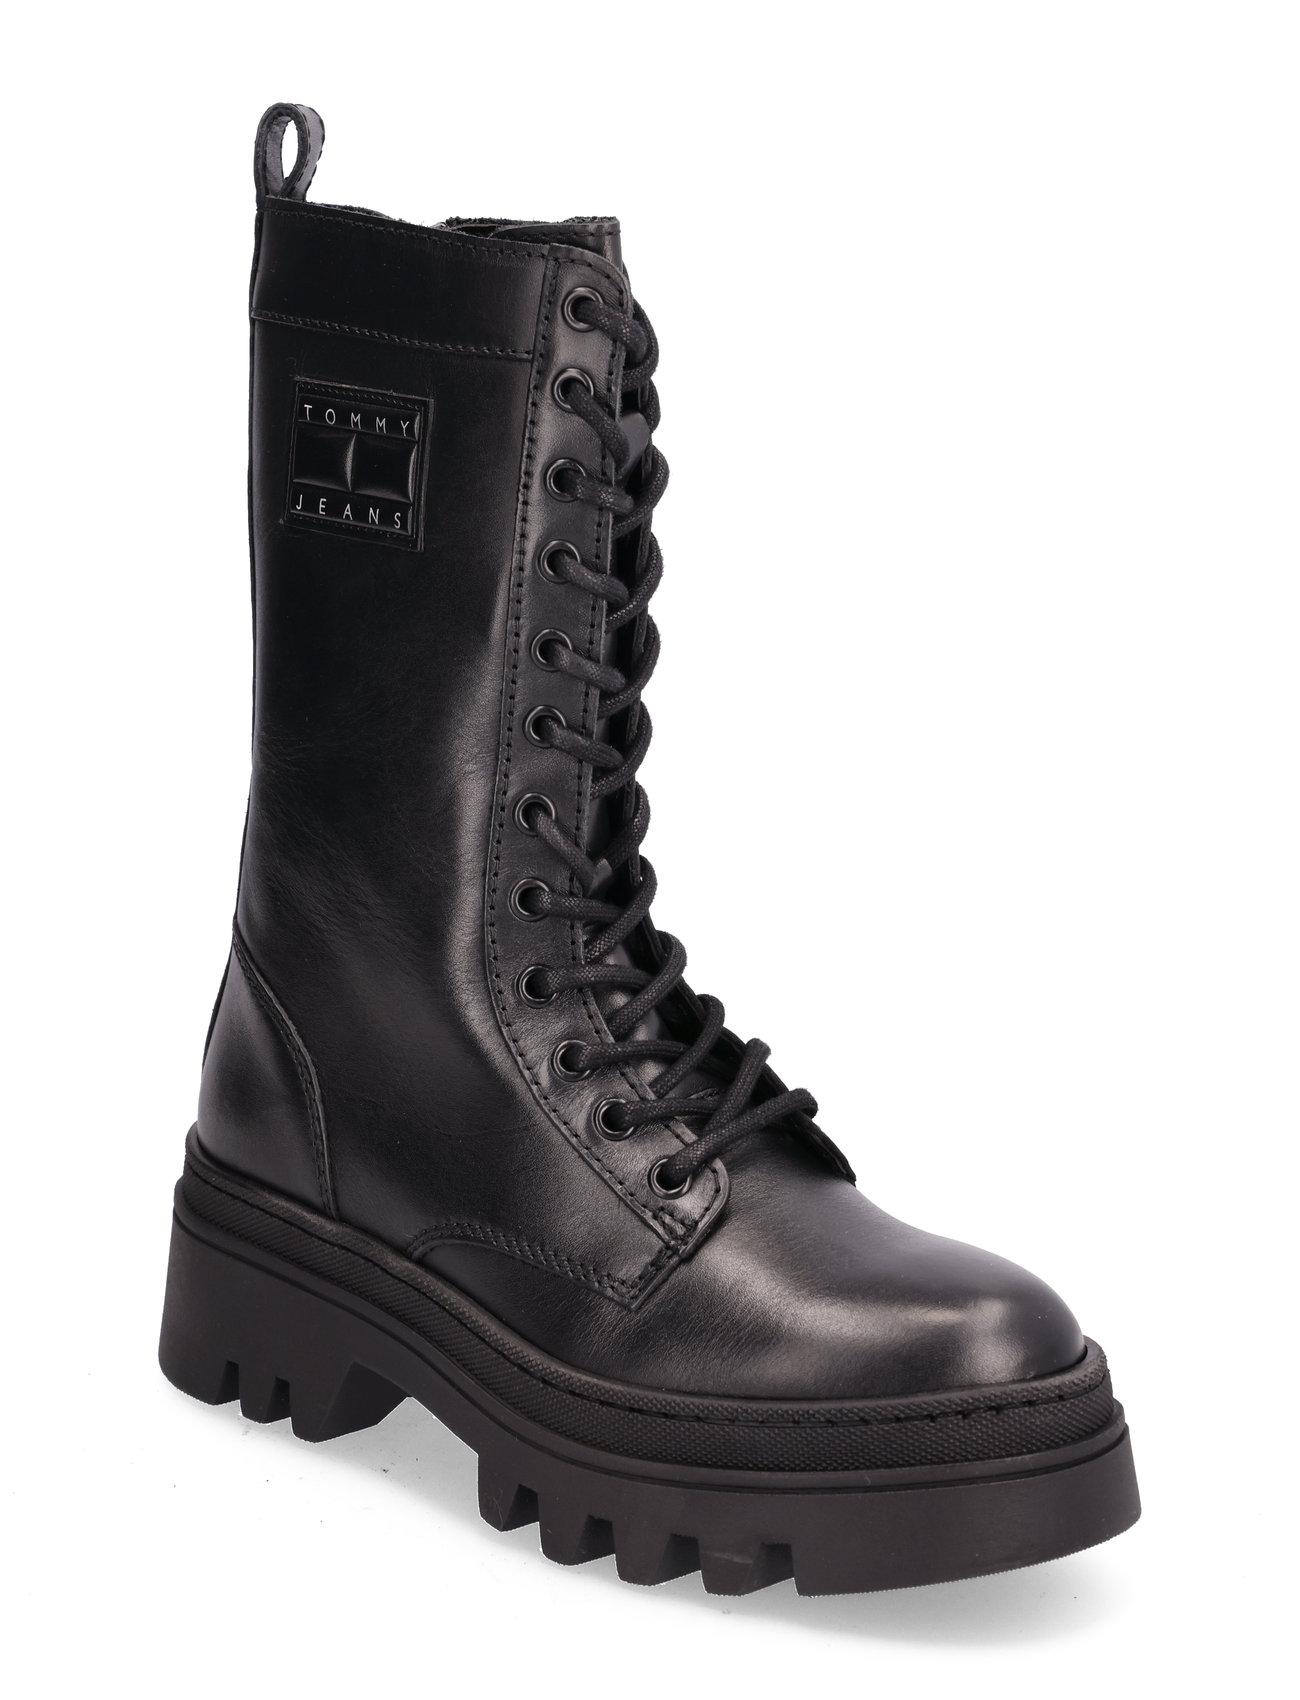 Tjw Fashion Lace Up Shoes Boots Ankle Boots Laced Boots Black Tommy Hilfiger